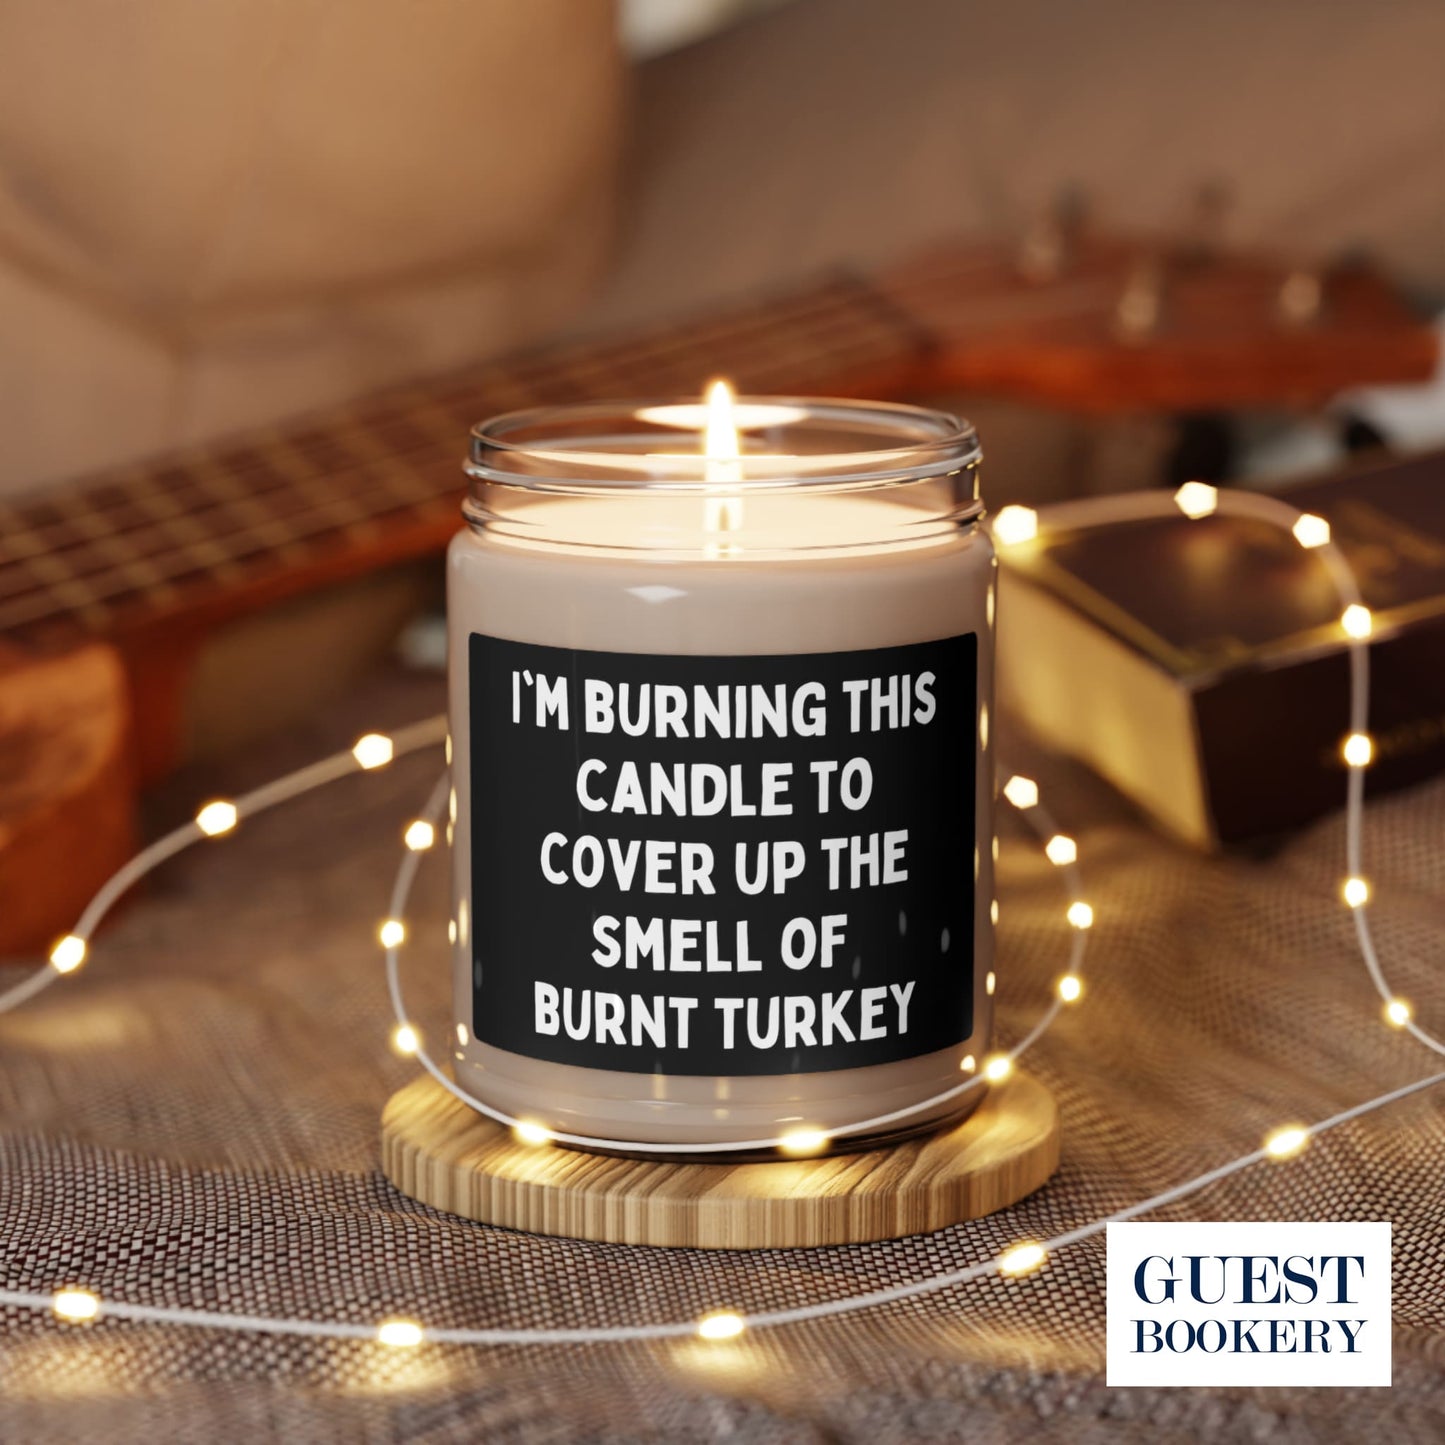 I'm Burning This Candle to Cover Up the Smell of Burnt Turkey Candle